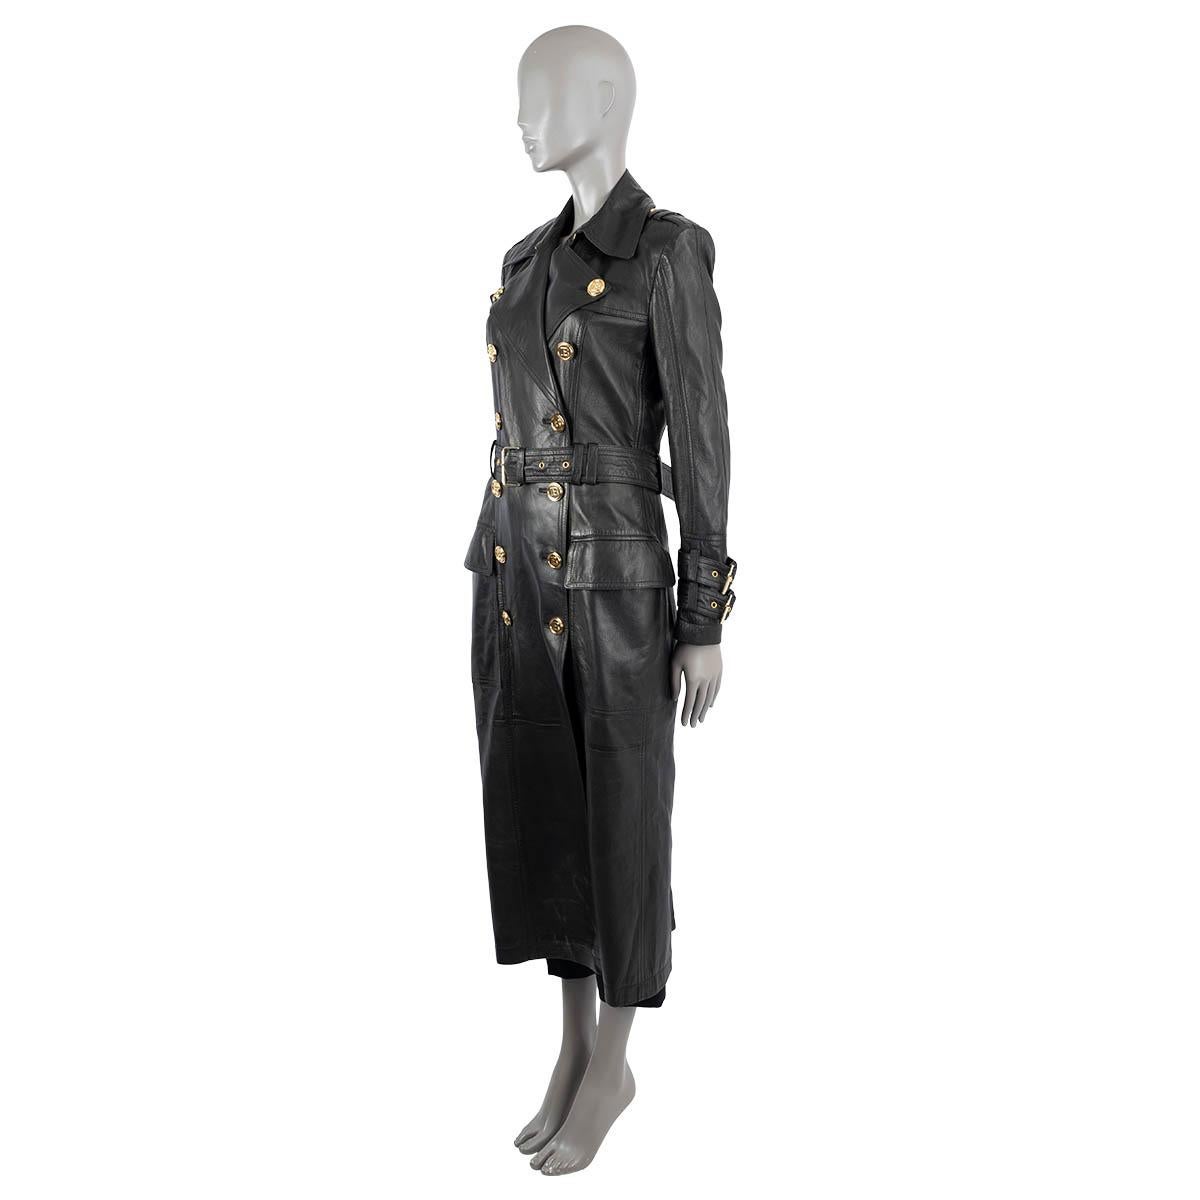 100% authentic Balmain double-breasted trench coat in black lambskin leather (100%). Features a tailored midi length silhouette, gold-tone B logo buttons, two flap pockets on the front, two belt straps on each cuff and a belt. Lined in viskose (52%)